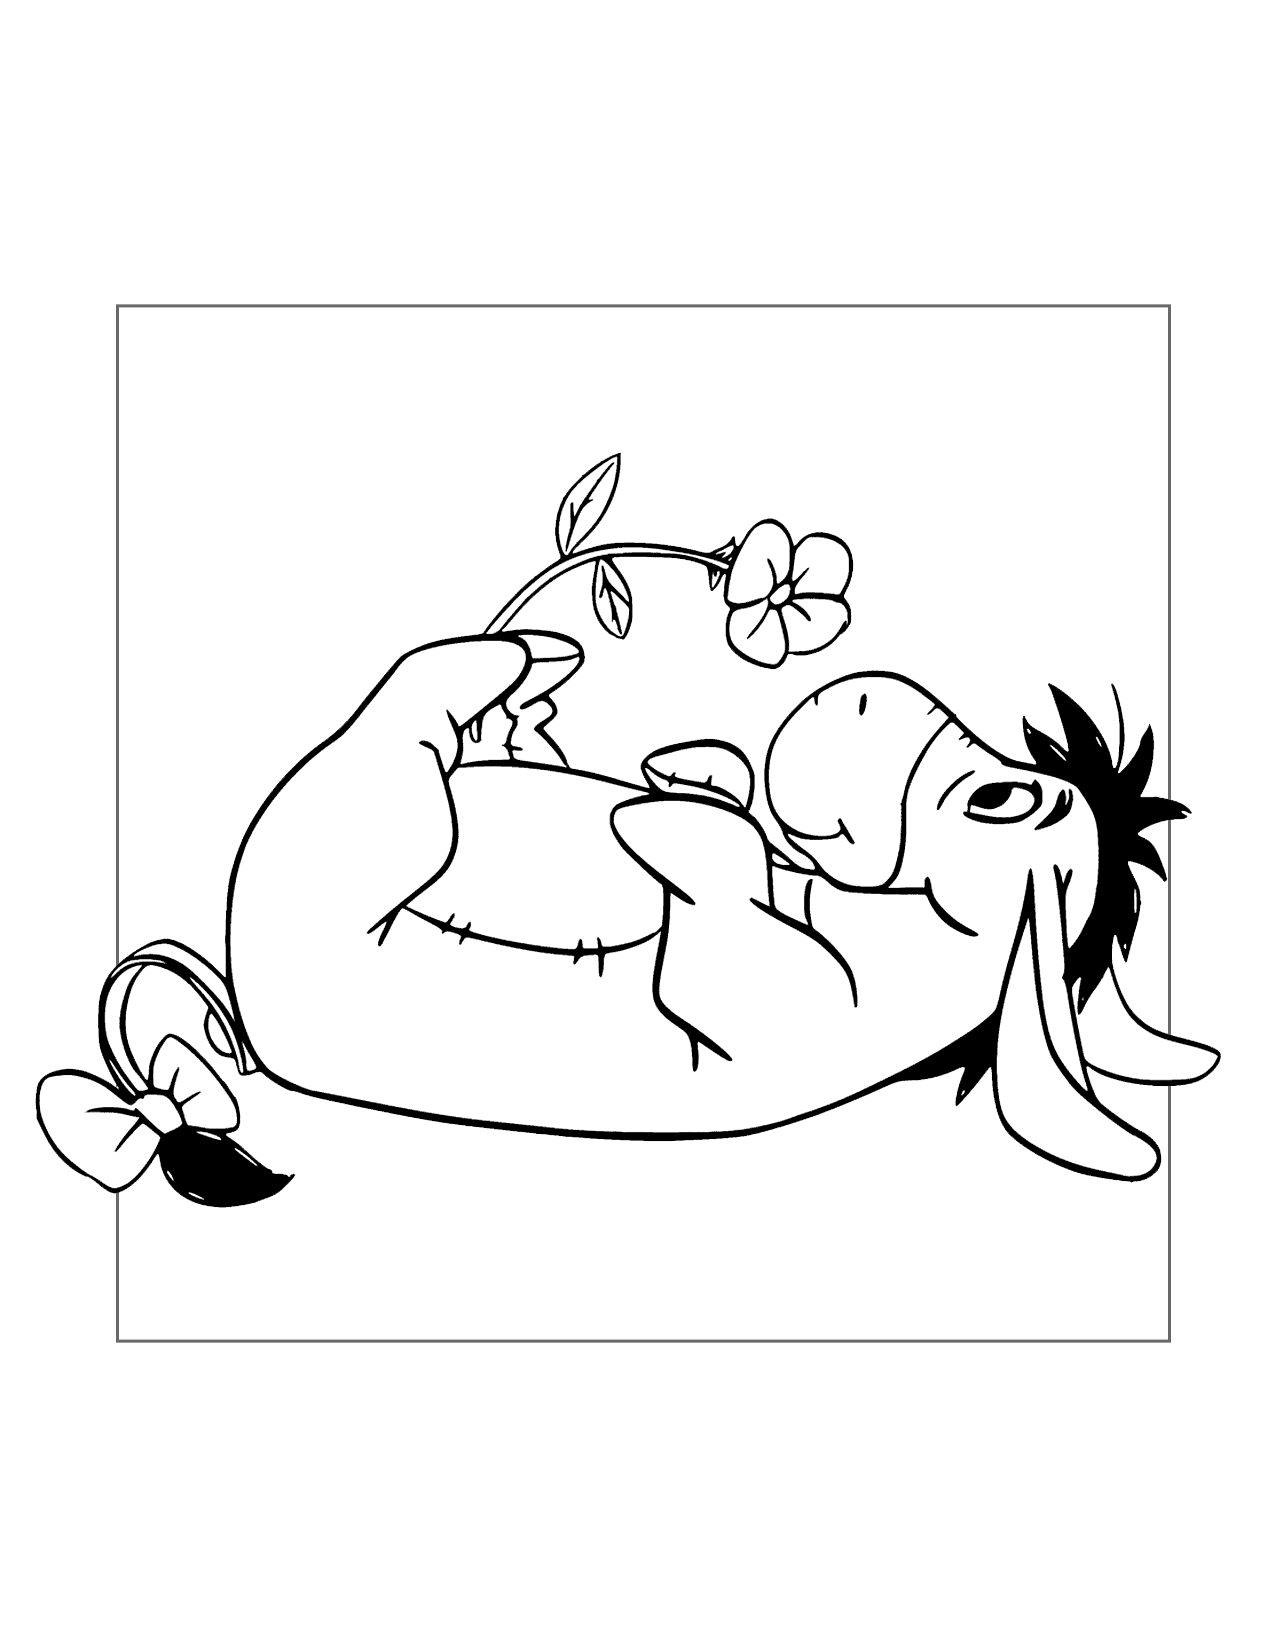 Eeyore Finds A Flower Coloring Page